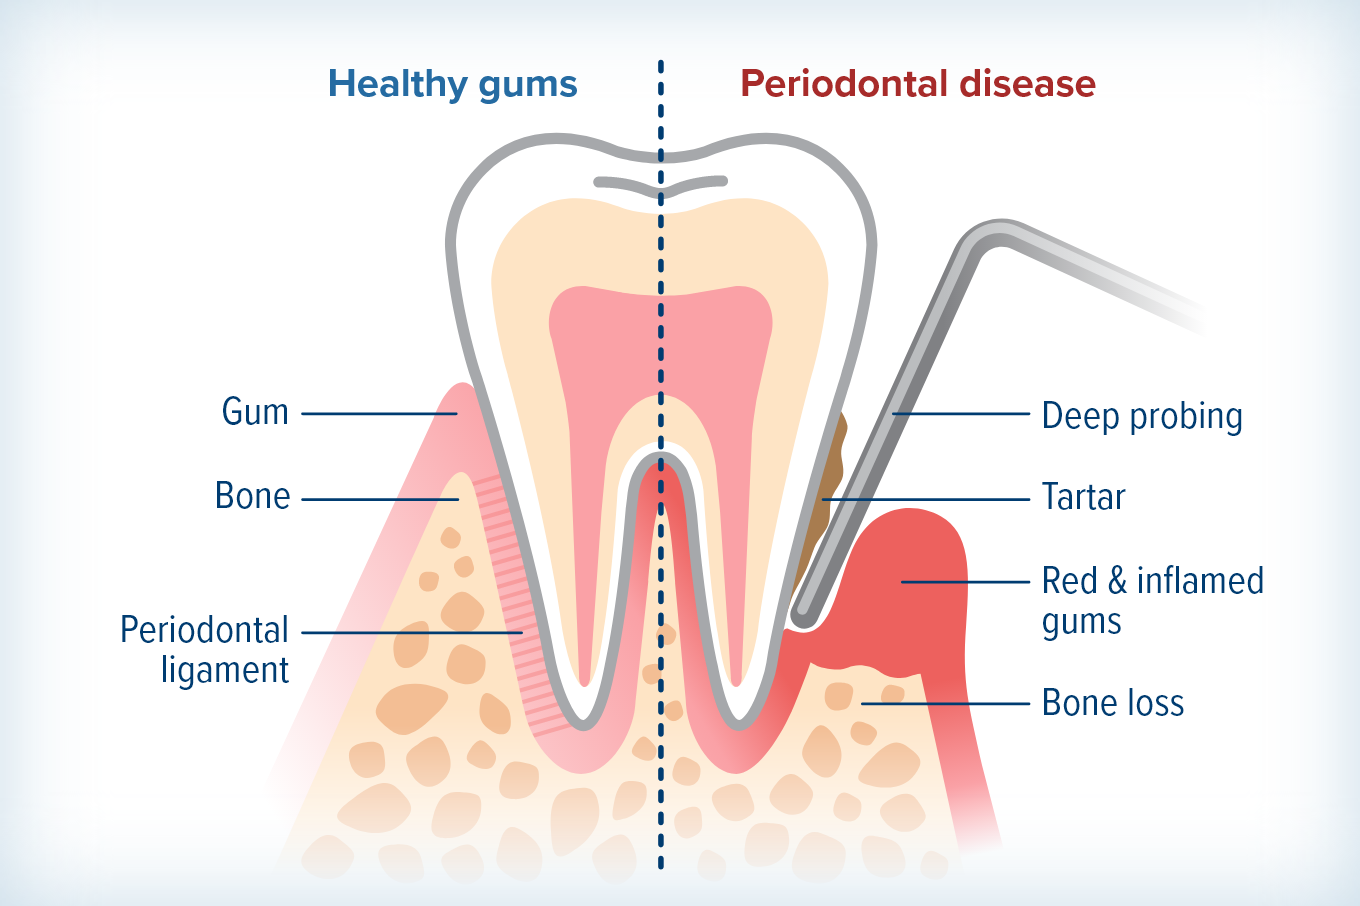 infographic showing the difference between healthy gums and gums with periodontal disease.